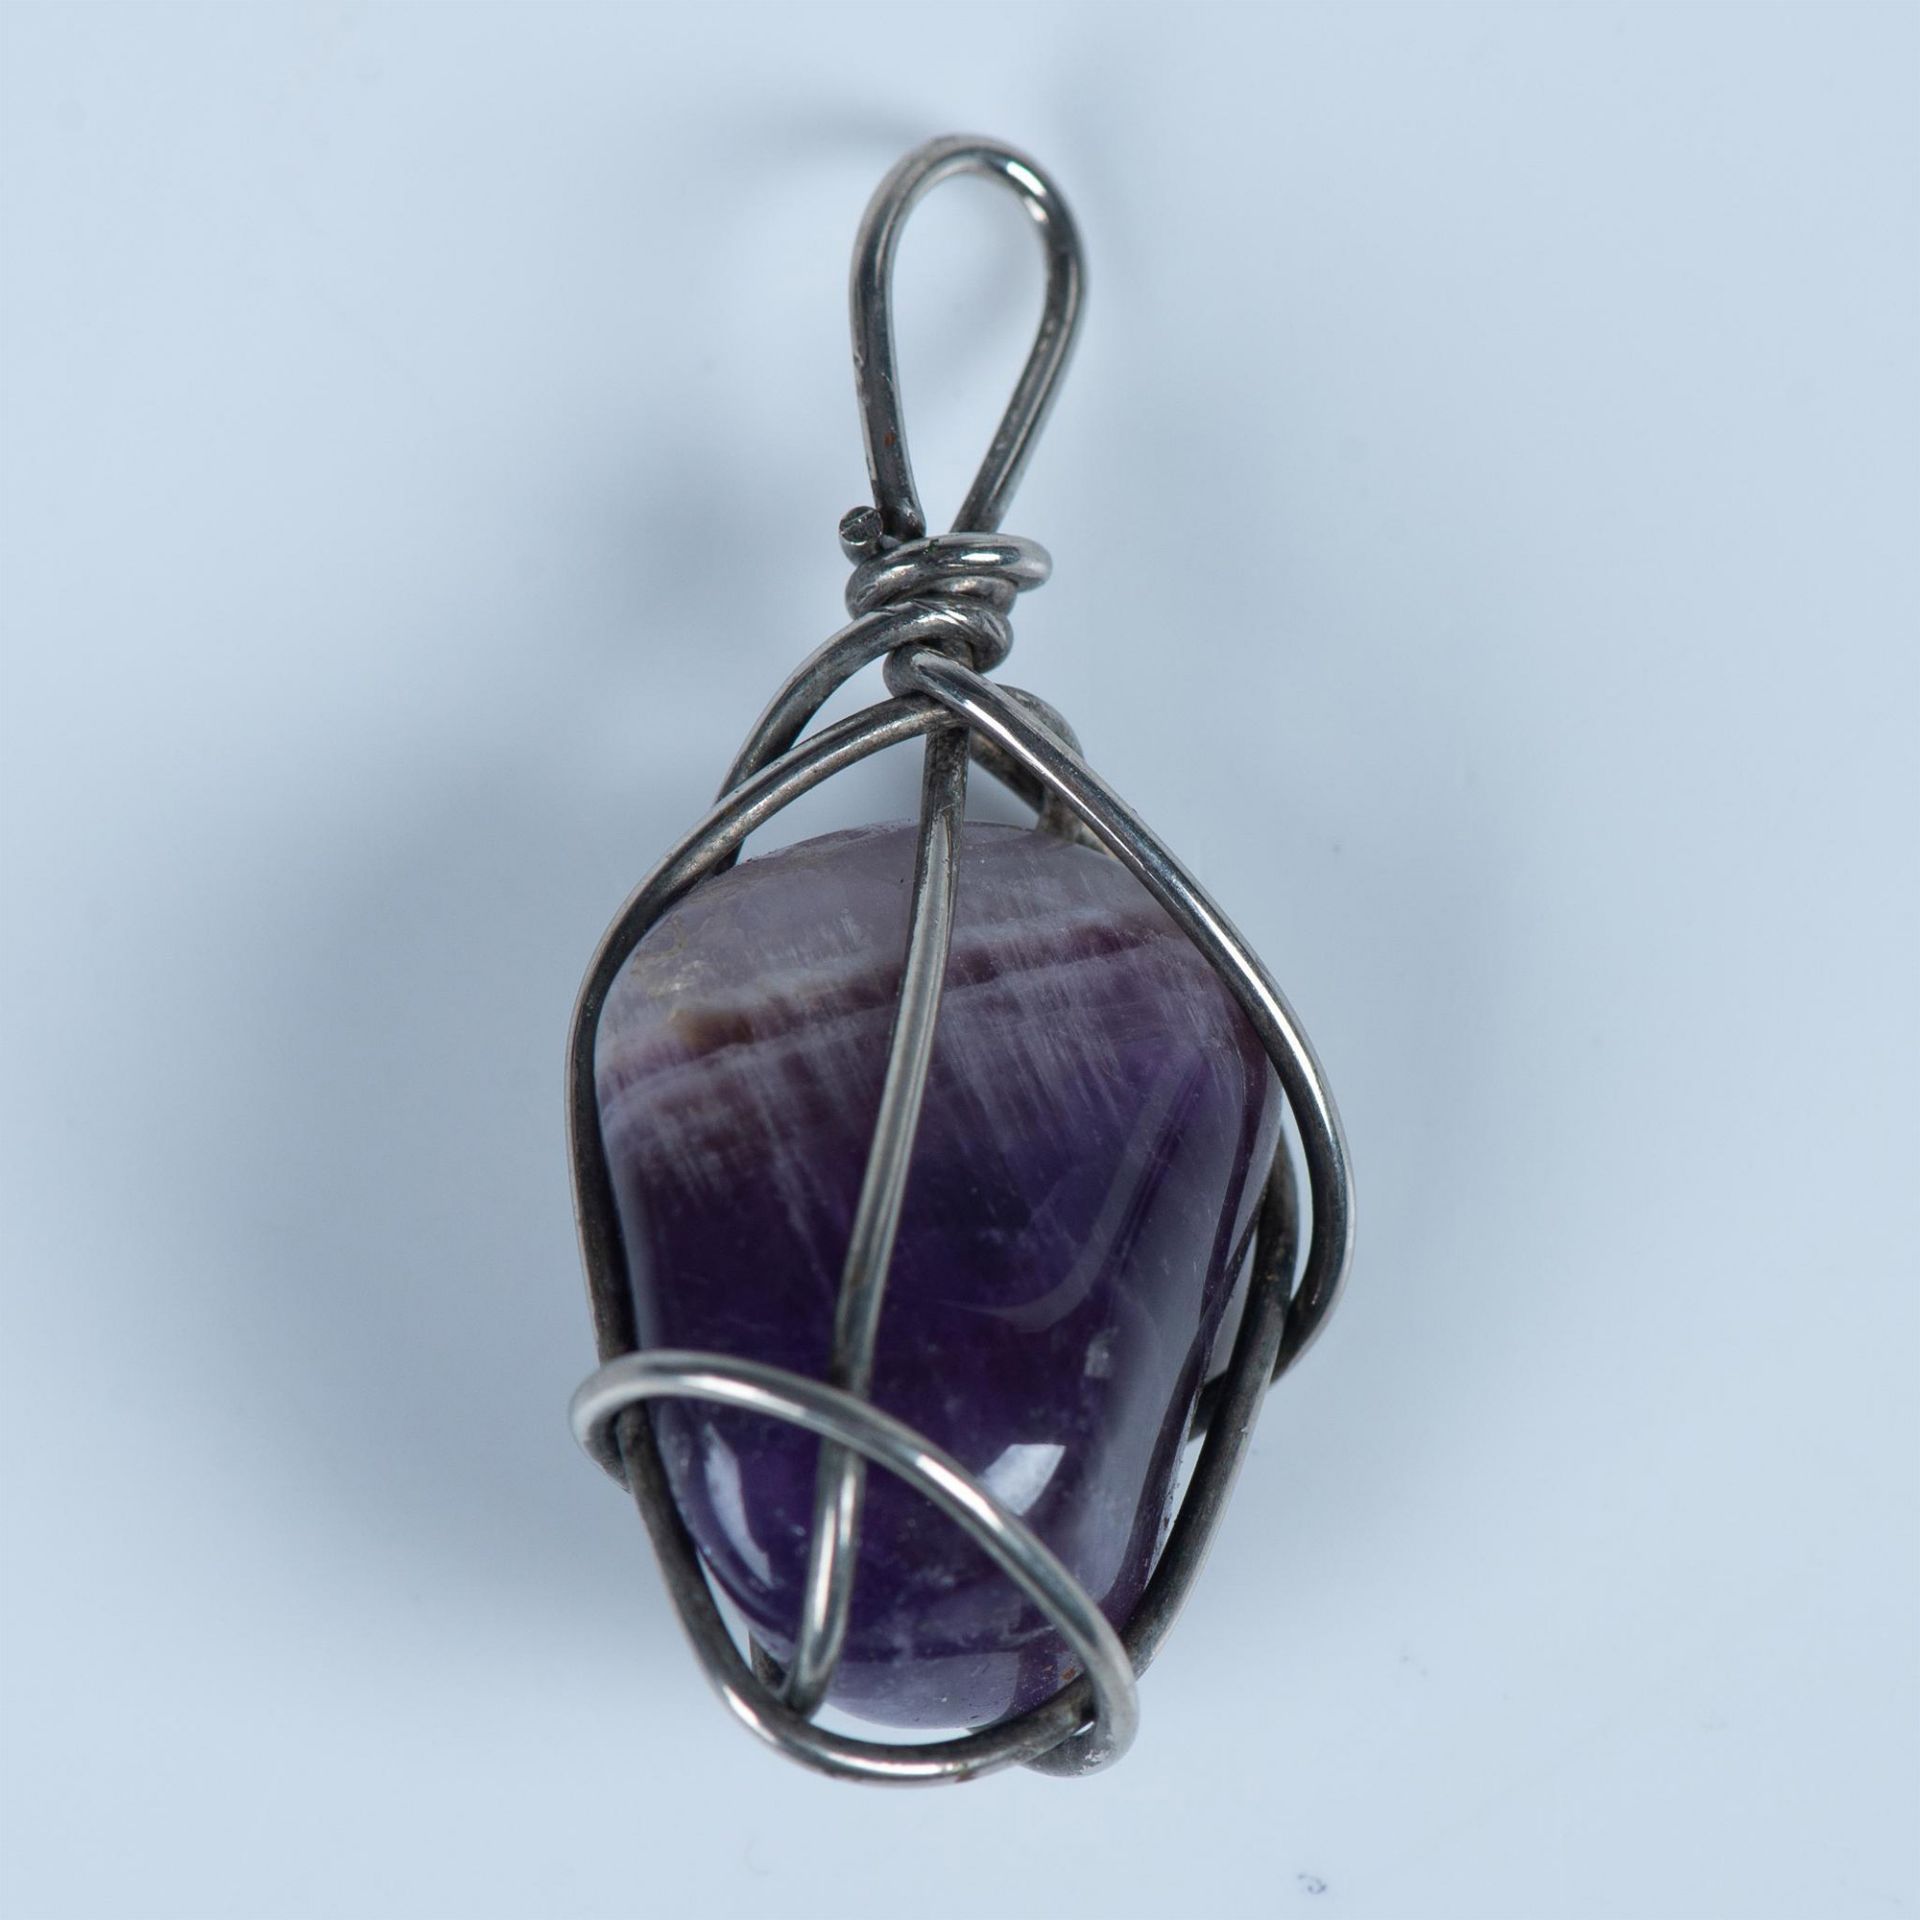 Handmade Wire-Wrapped Amethyst Pendant - Image 2 of 4